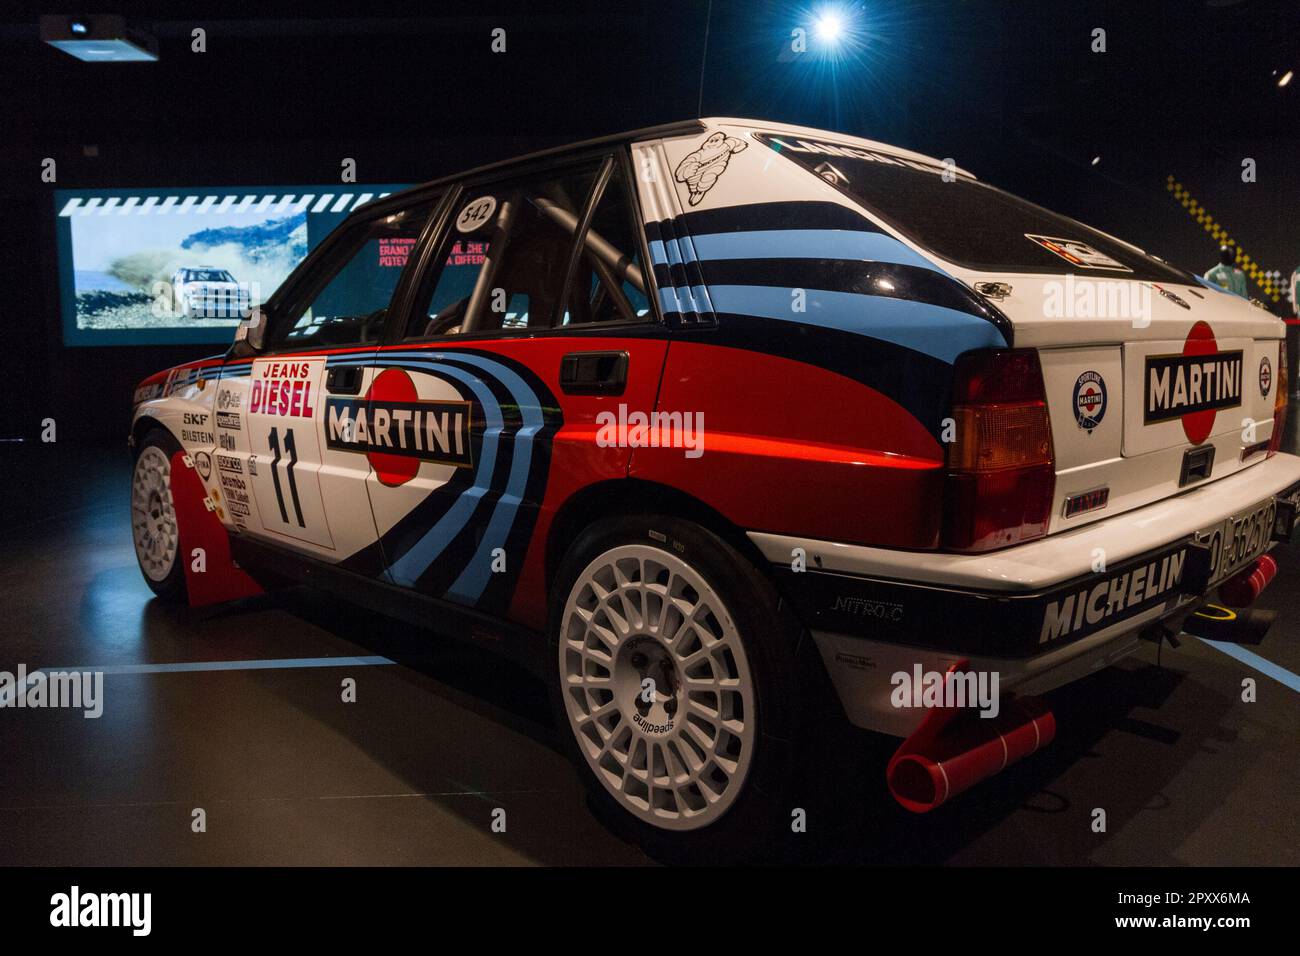 Lancia Delta HF integrale 16v (1990). Exhibition of old rally cars 'Golden age of Rally' at MAUTO, Museo dell'Automobile of Turin, Italy. Stock Photo